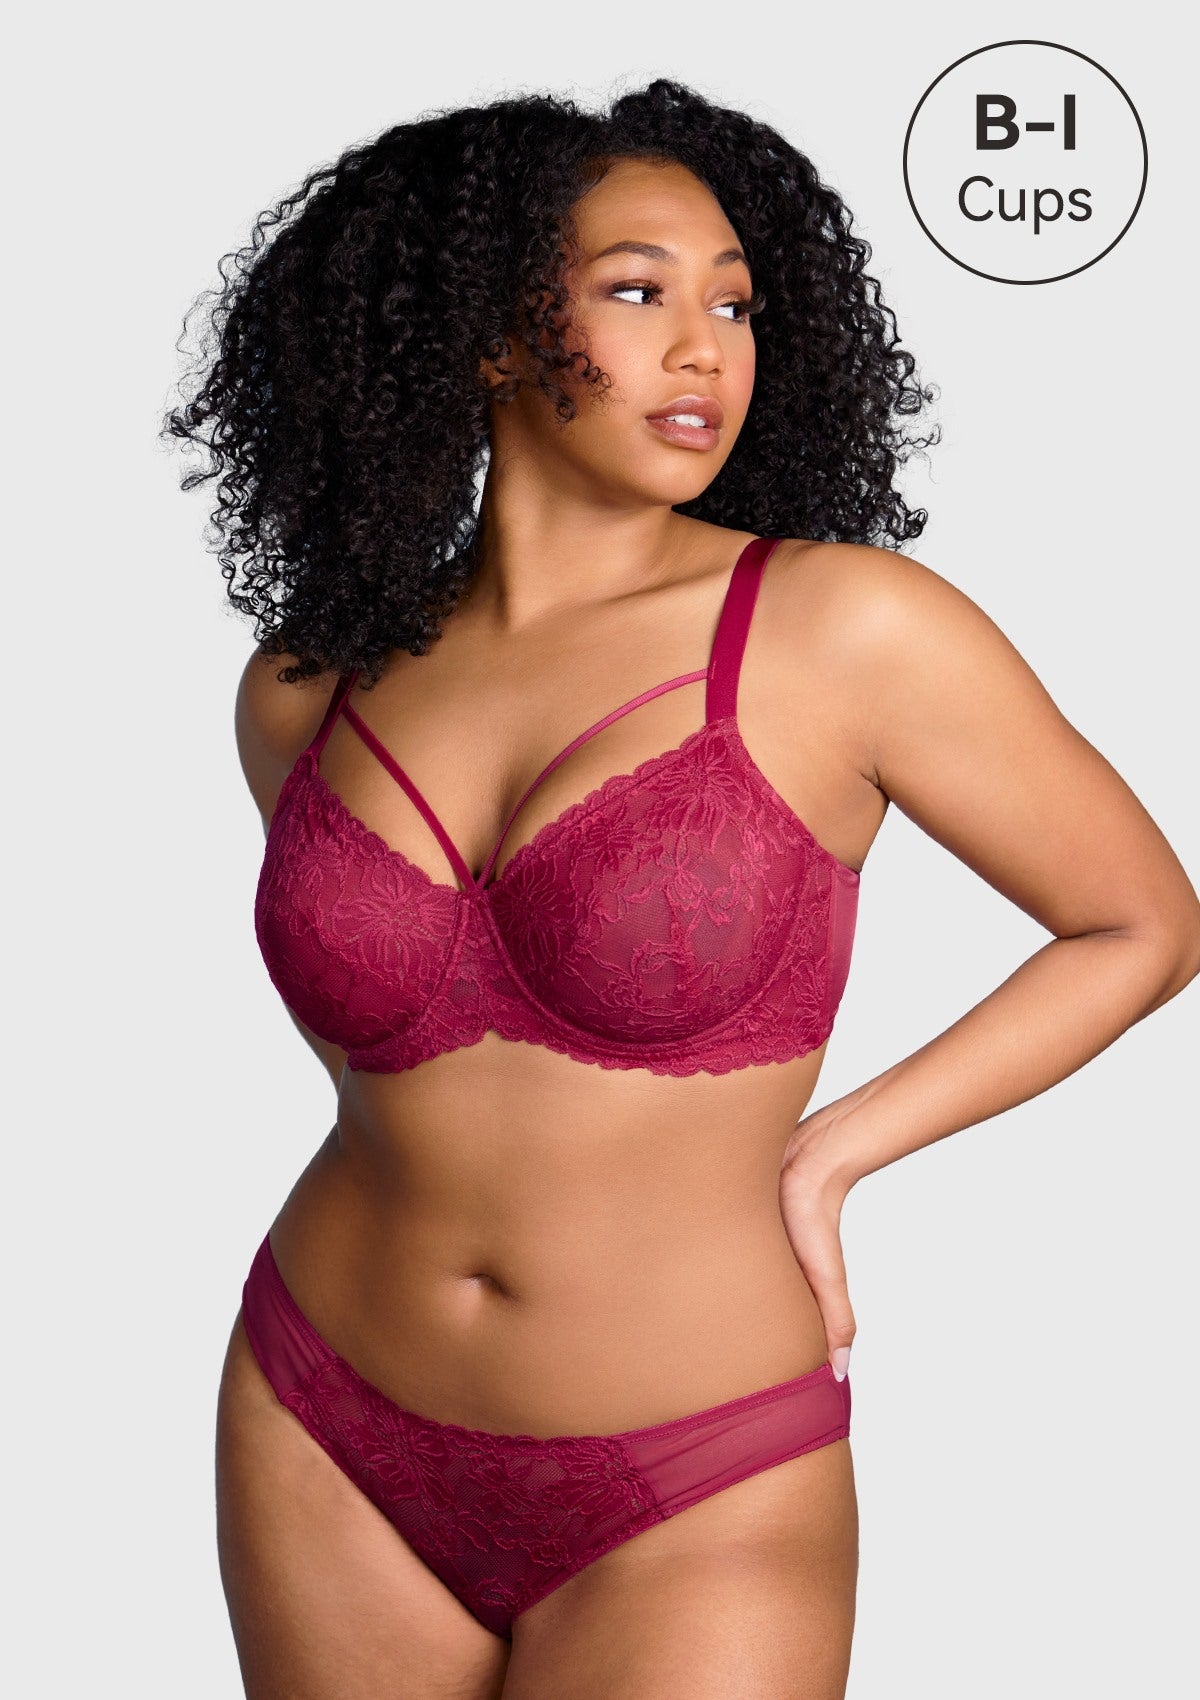 HSIA Pretty In Petals Sexy Lace Bra: Full Coverage Back Smoothing Bra - Red / 44 / I